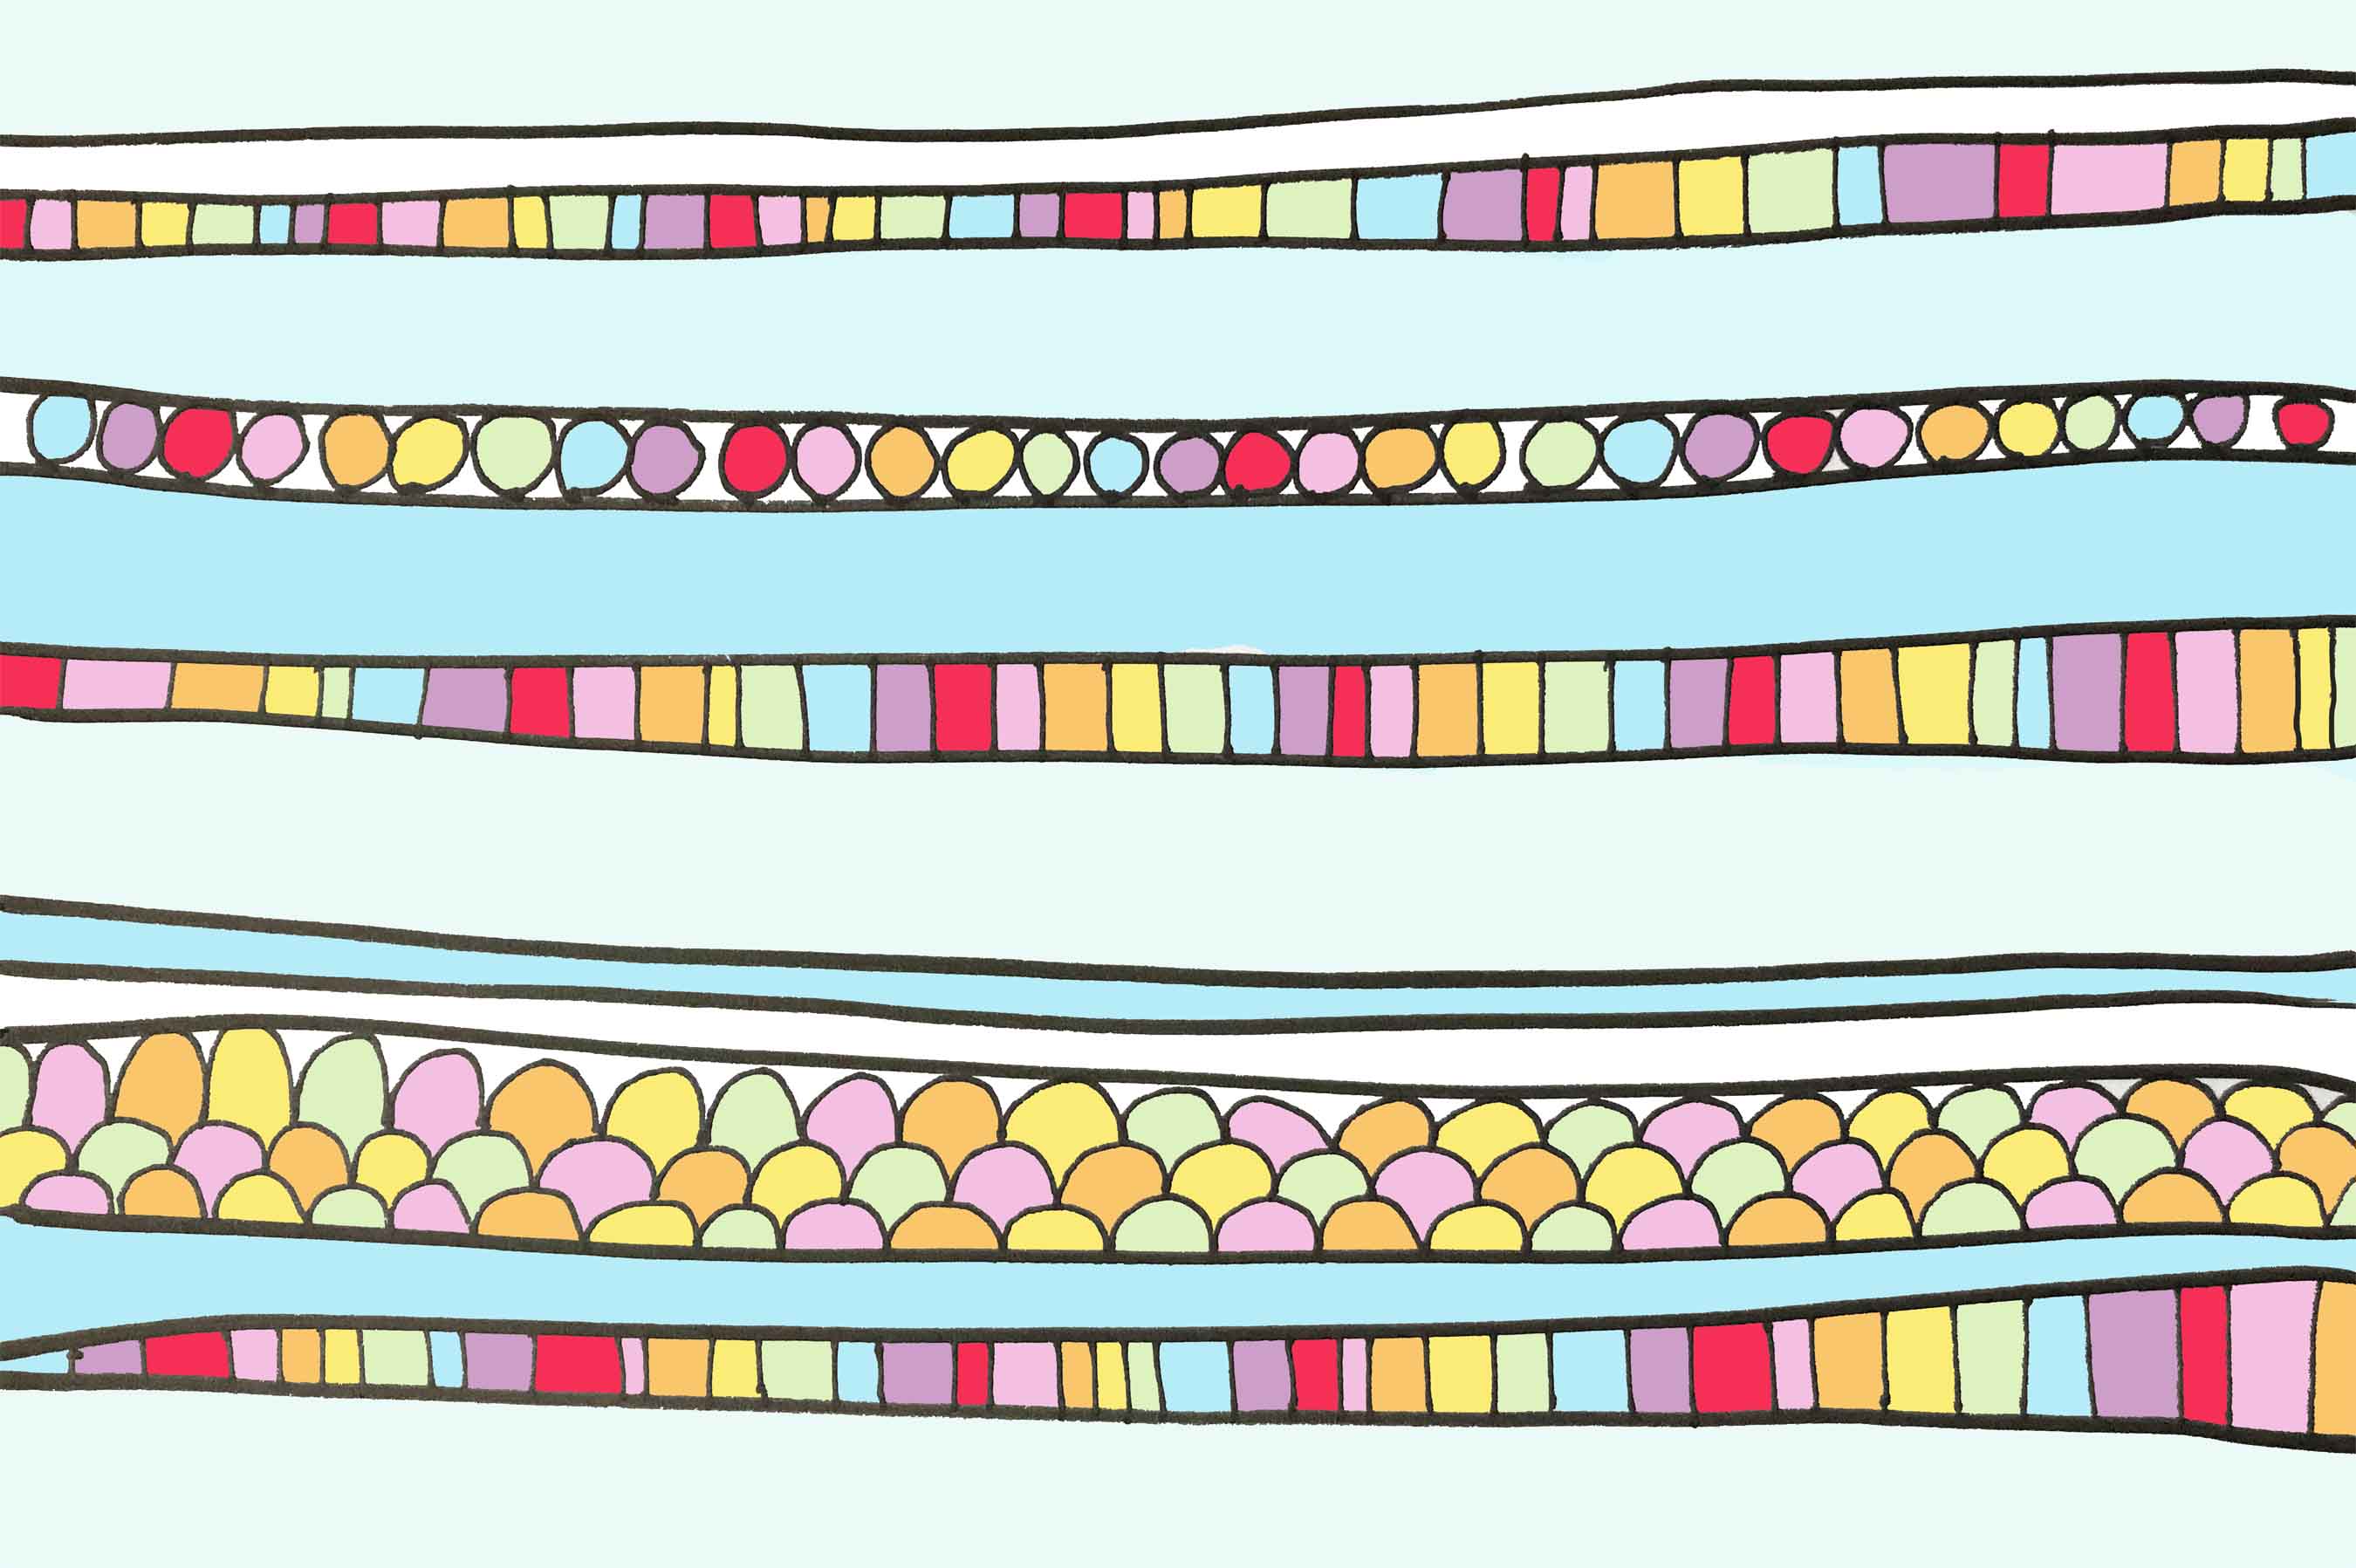 art every day number 434 / pattern / the candy store